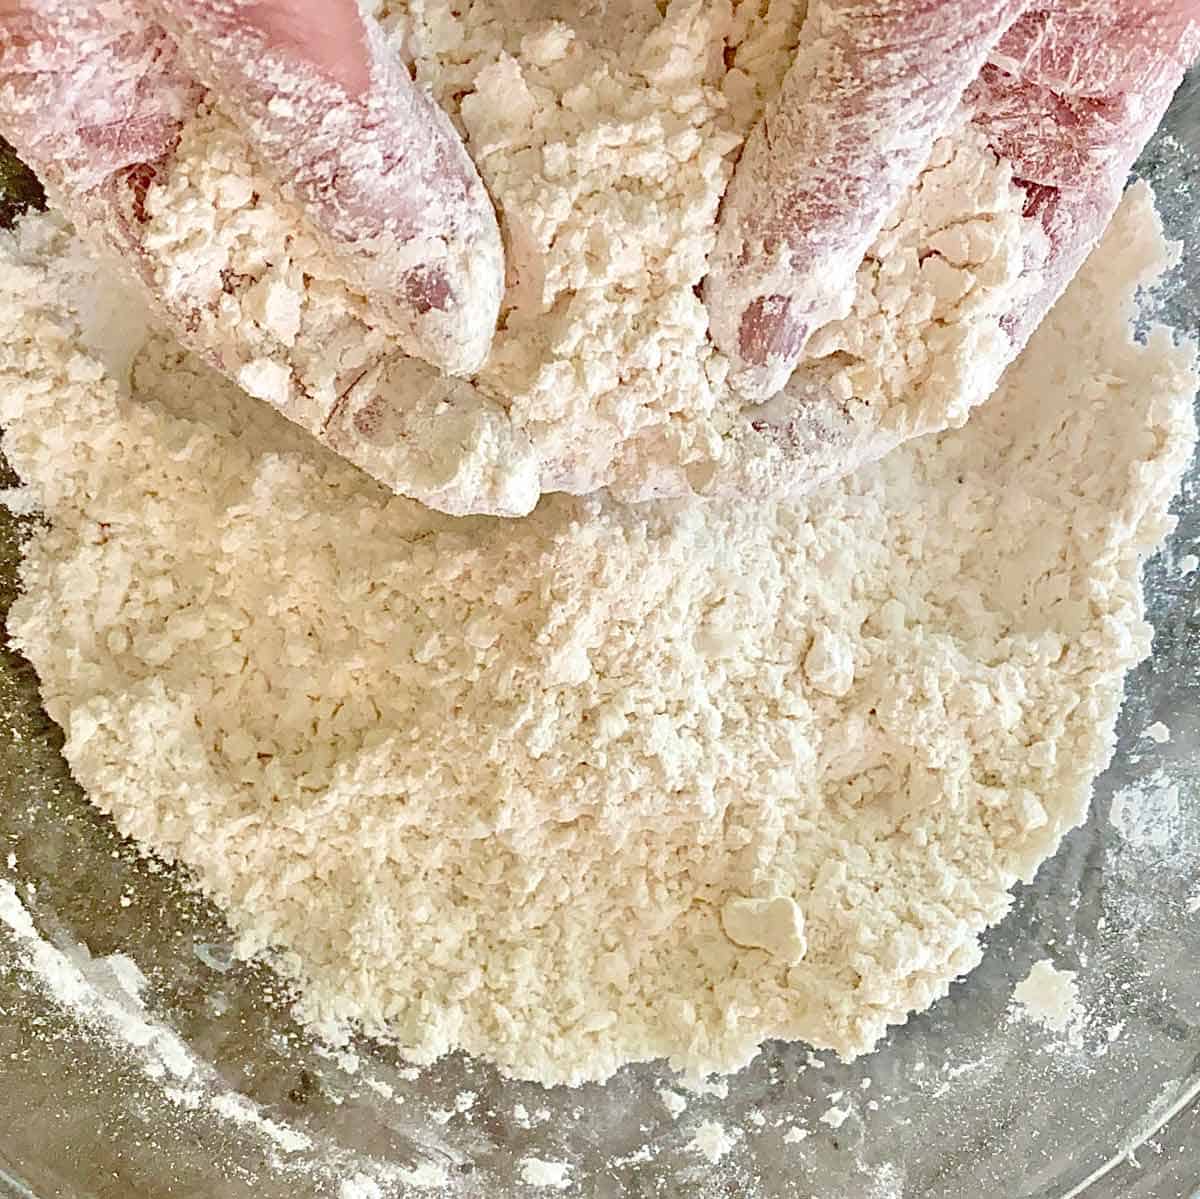 Using hands to blend butter and bacon grease with flour mixture.